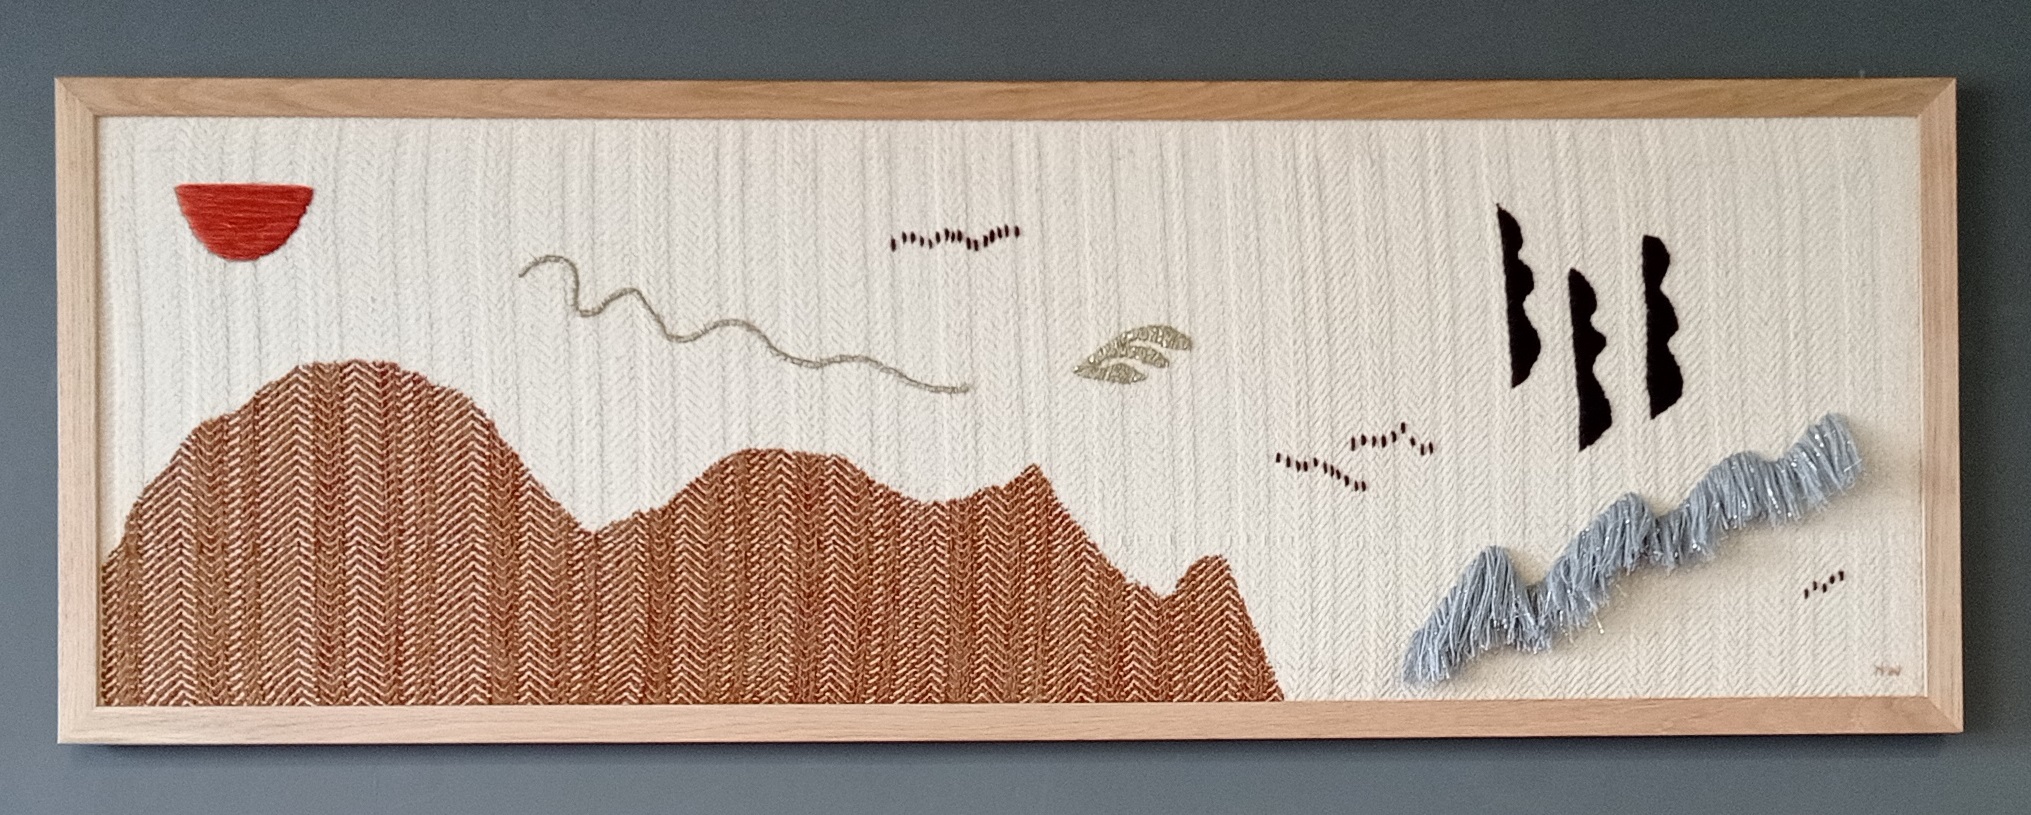 A figurative textile work. Brown shape reminiscent of a hill against an off-white background with features suggestive of natural formations. Framed in light wood and hanging on a grey wall.